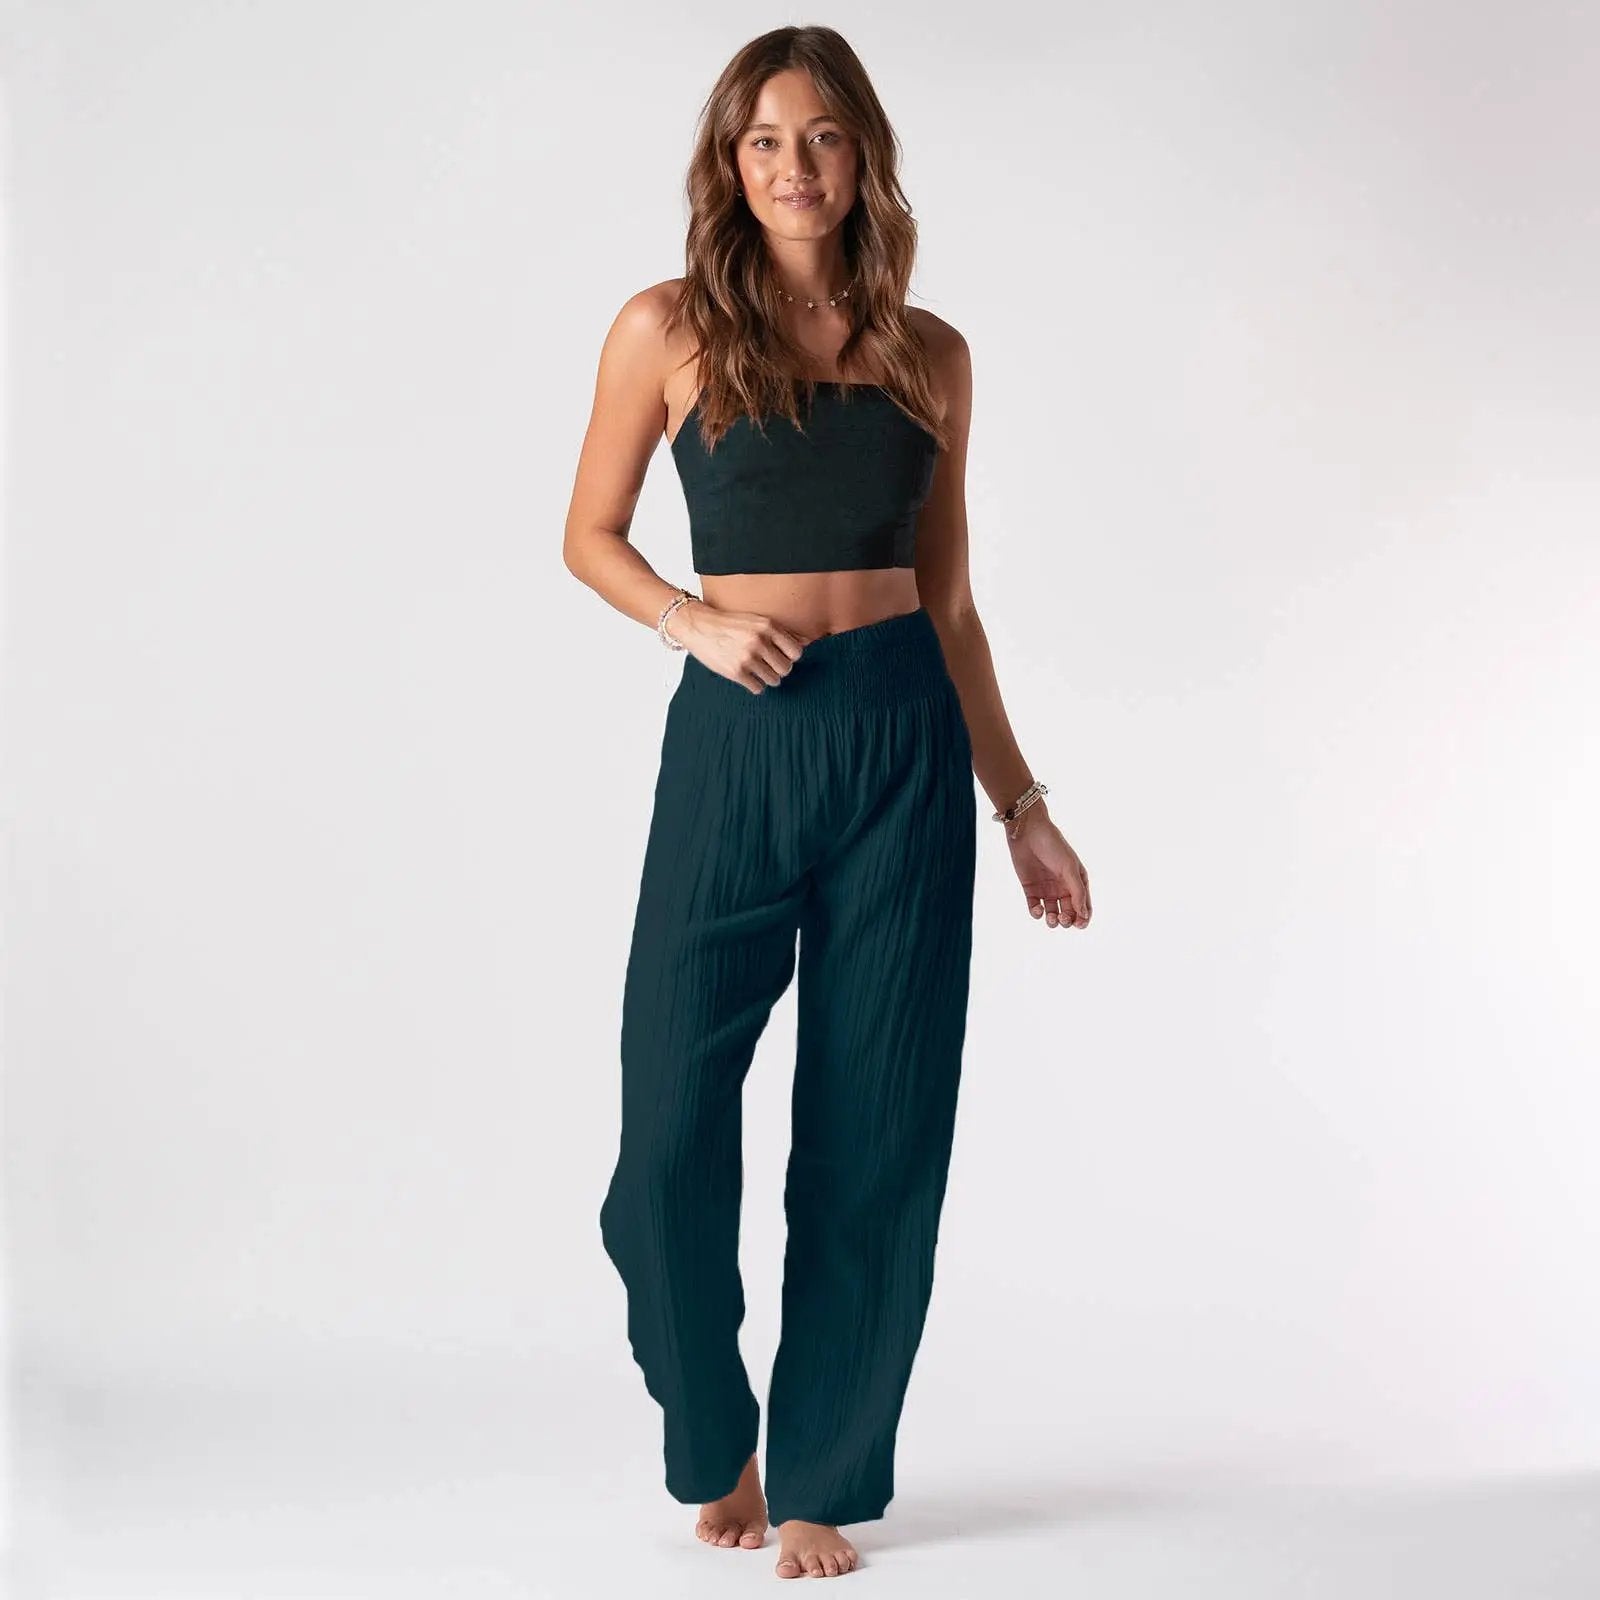 THE UPSIDE Lotus Milly Mélange Flared Pants | INTERMIX®